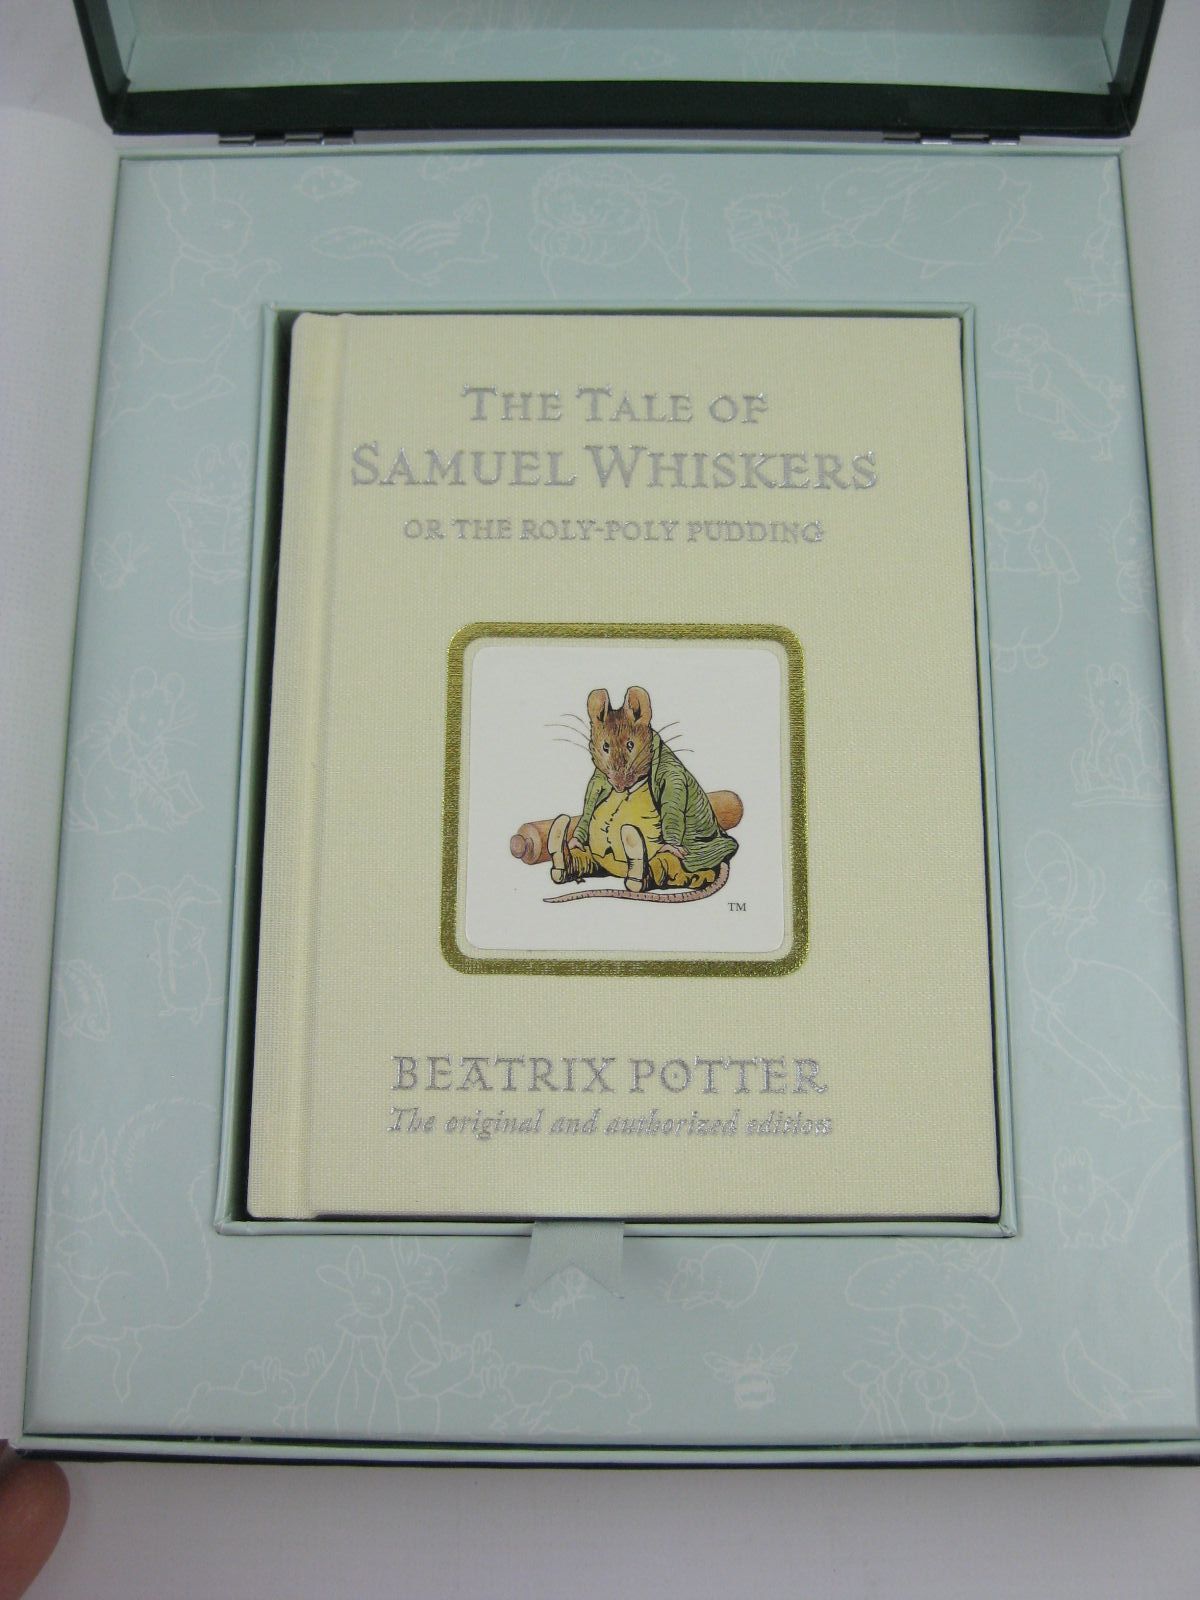 Photo of THE TALE OF SAMUEL WHISKERS OR THE ROLY-POLY PUDDING written by Potter, Beatrix illustrated by Potter, Beatrix published by Frederick Warne, The Penguin Group (STOCK CODE: 1316345)  for sale by Stella & Rose's Books